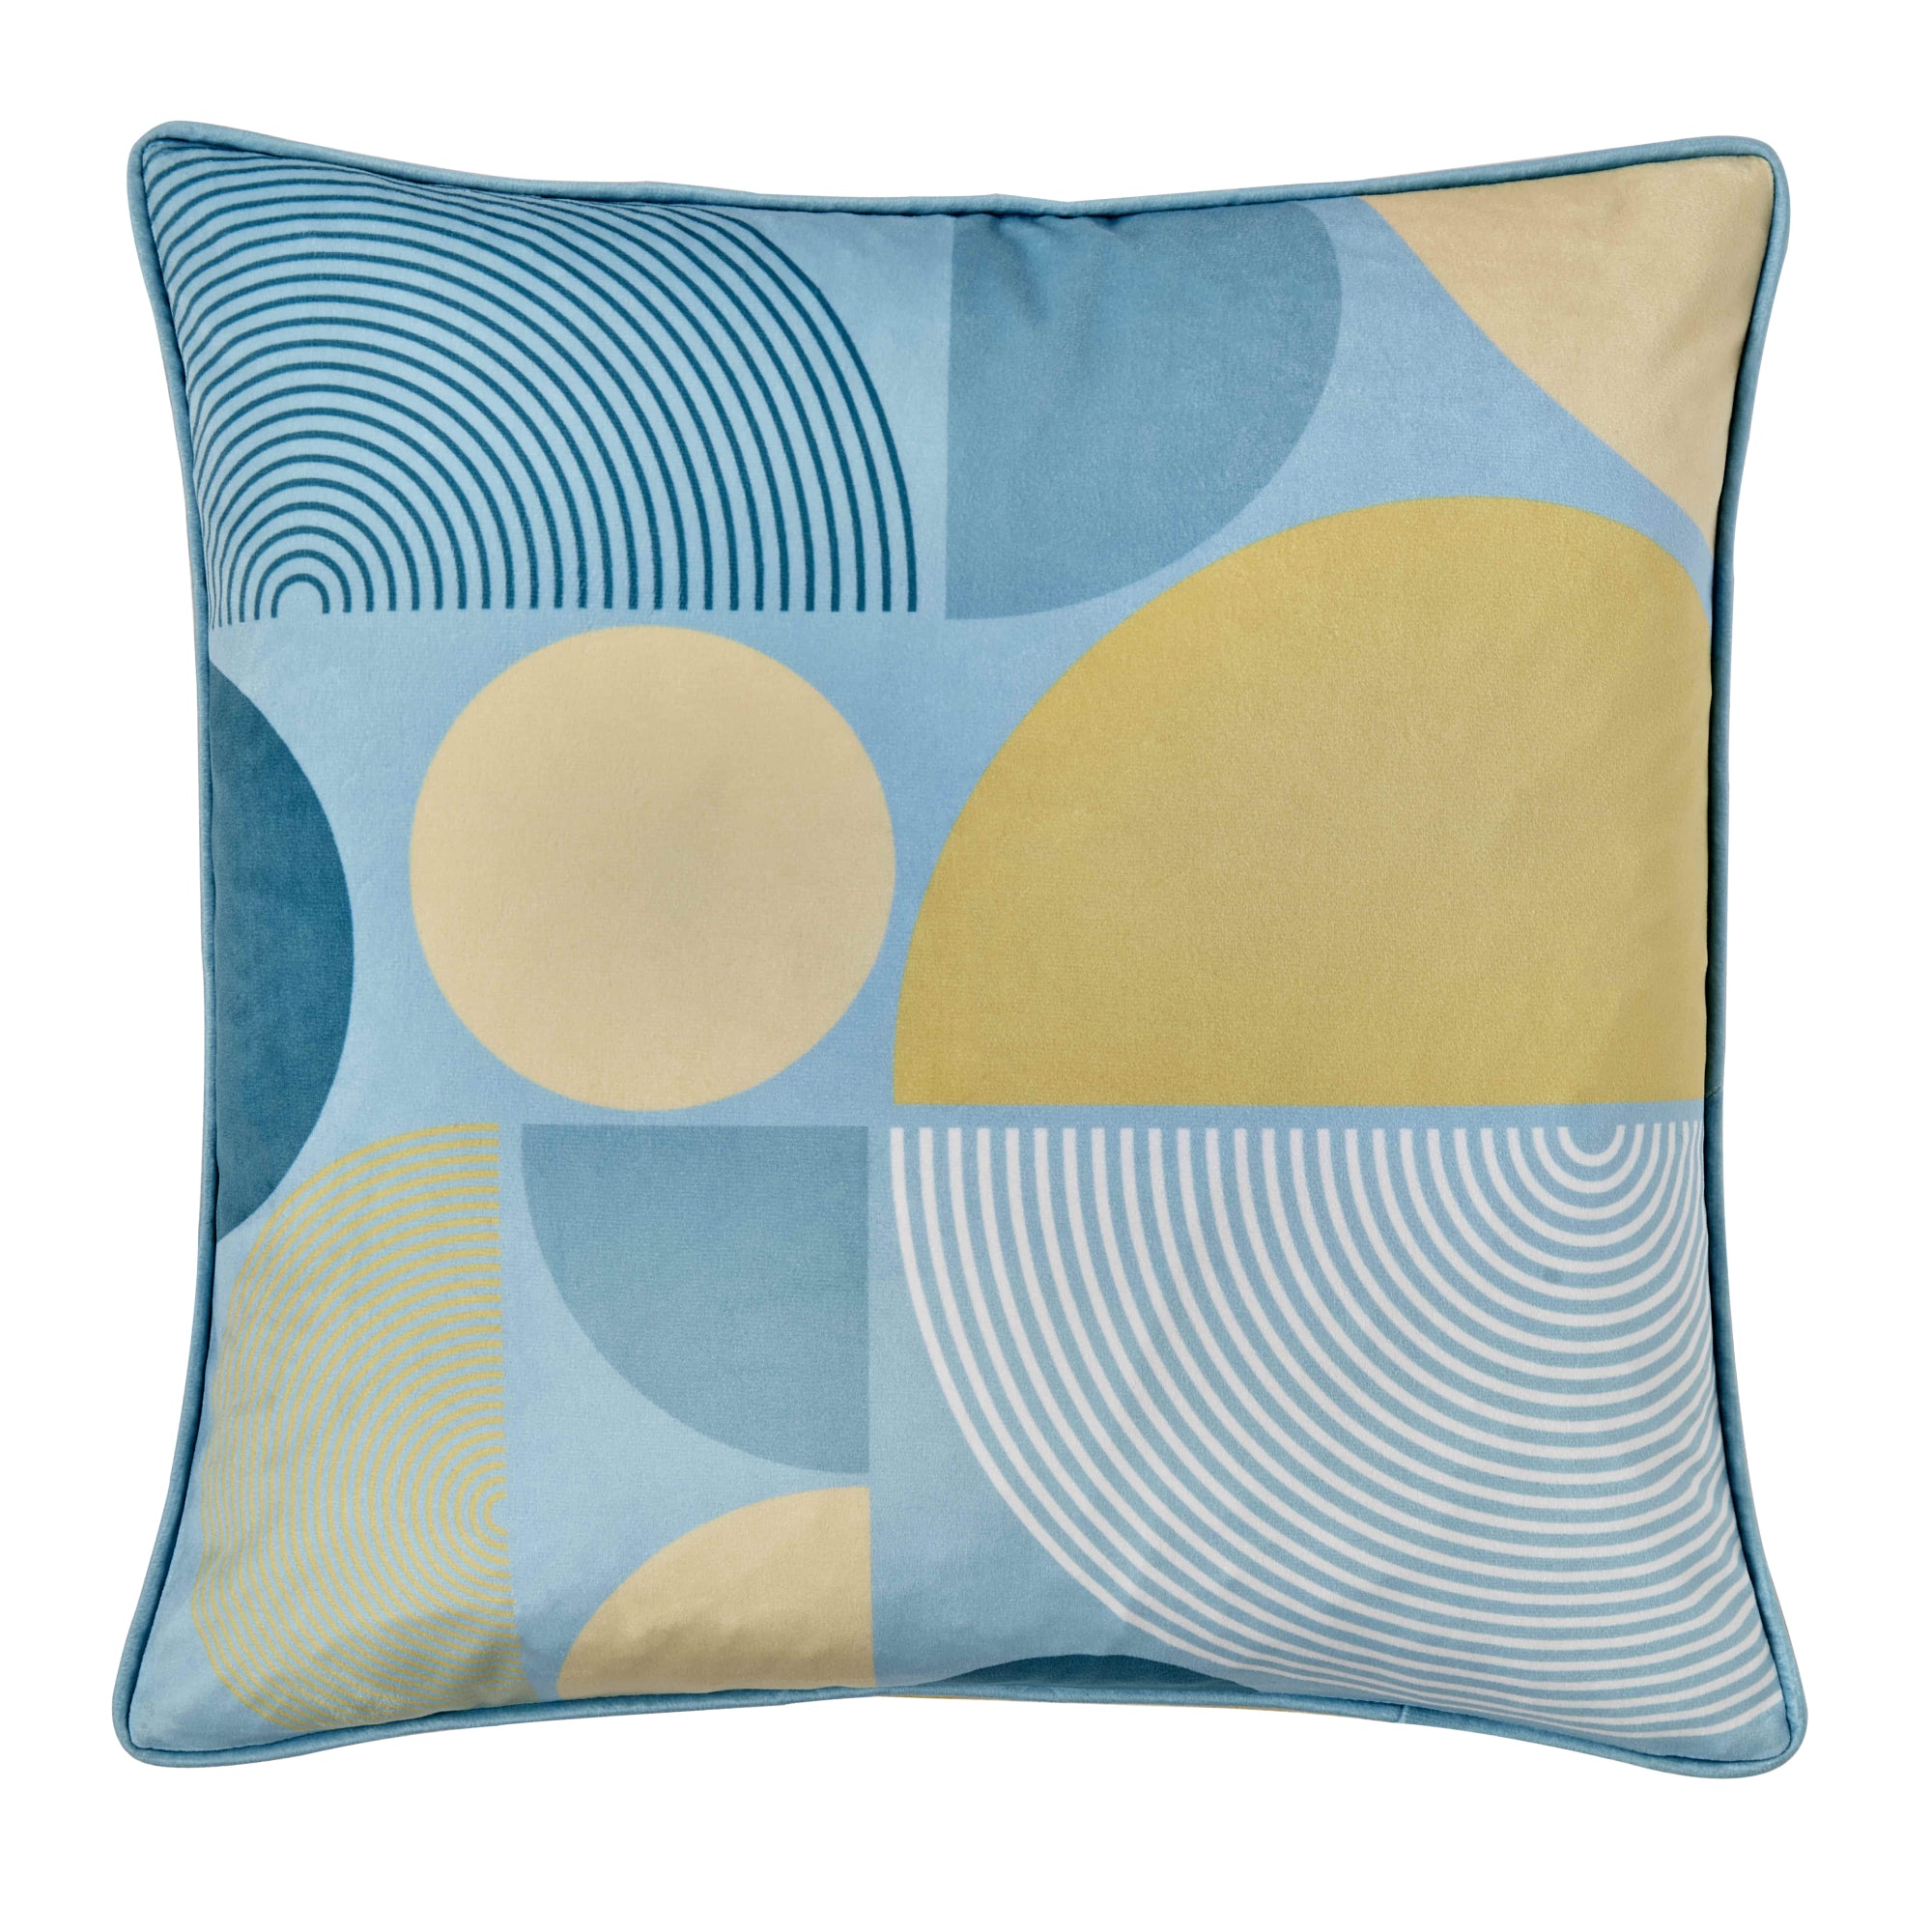 Filled Cushion Ingo by Fusion in Teal